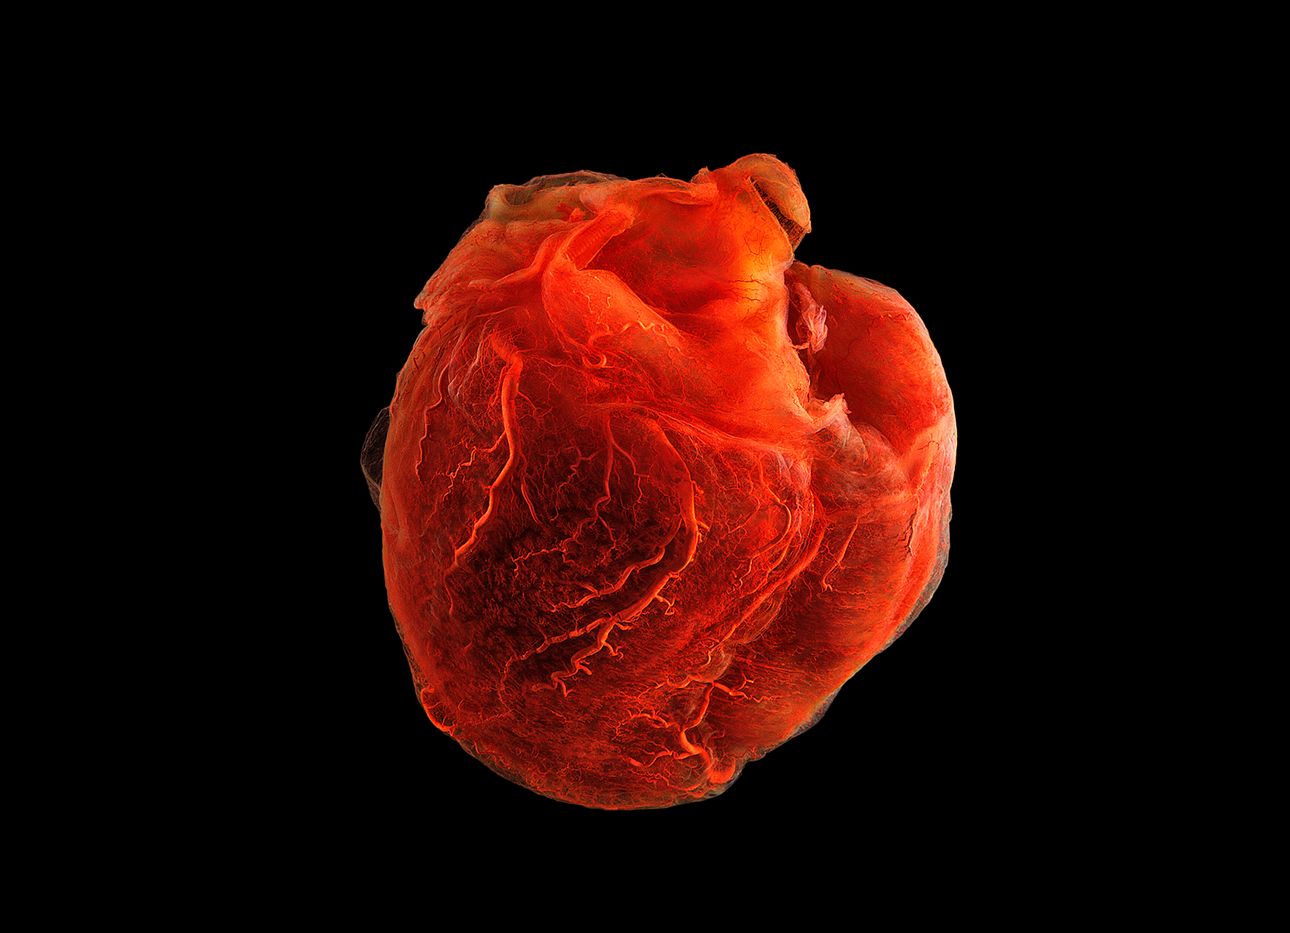 A red human heart on a black background.